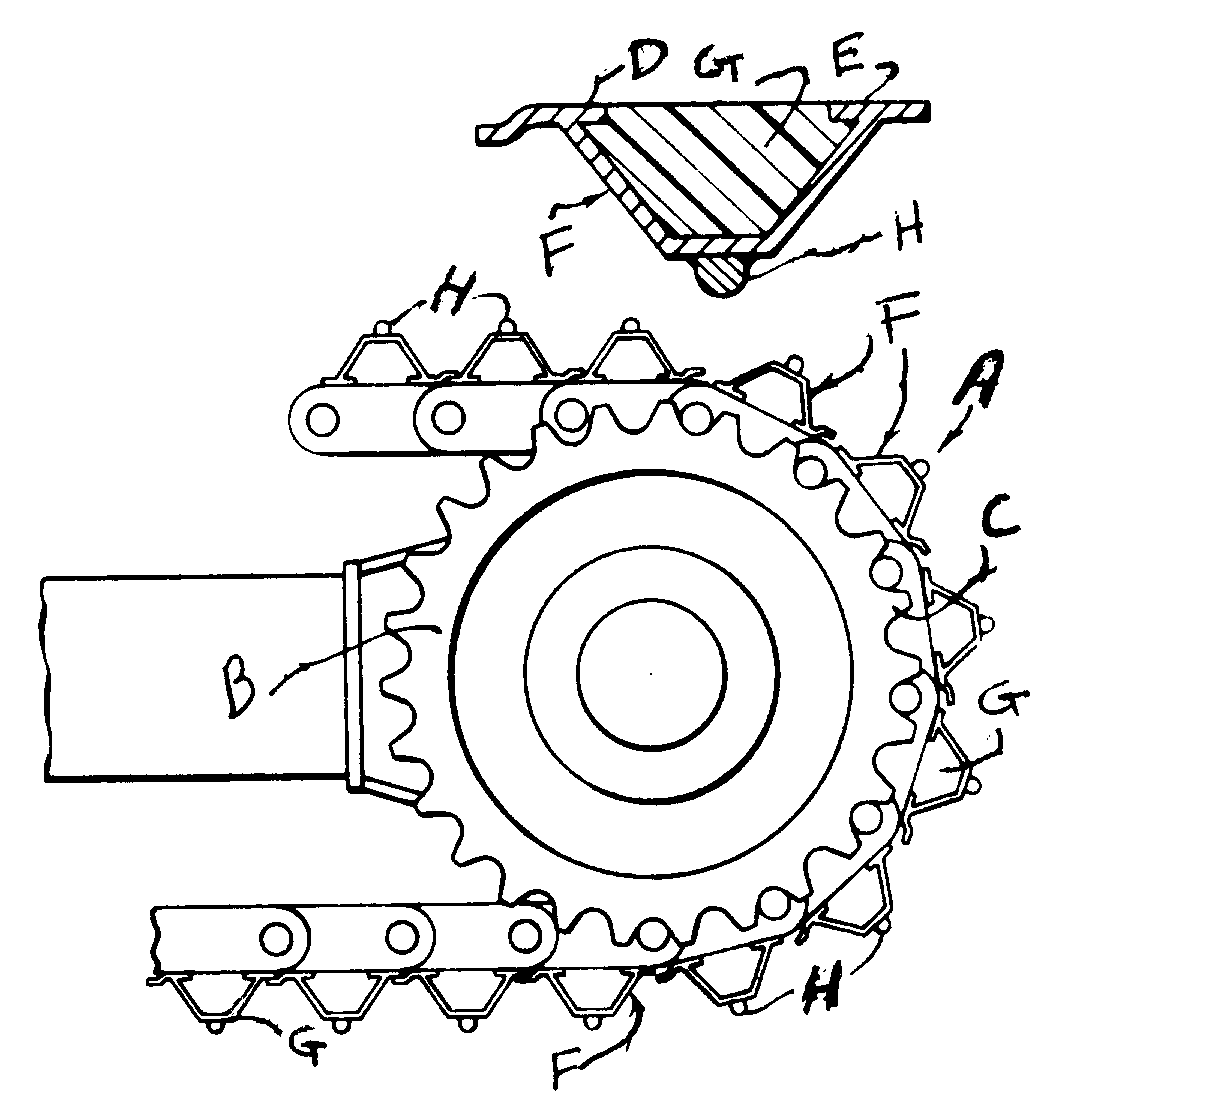 A - Chain track; B - Sprocket wheel; C - Sprockets; D,E - Chain plate; F - Cleat having same thickness as chain plate;G - Opening filled with elastomeric material ; H - Projecting piecesfor improved traction
